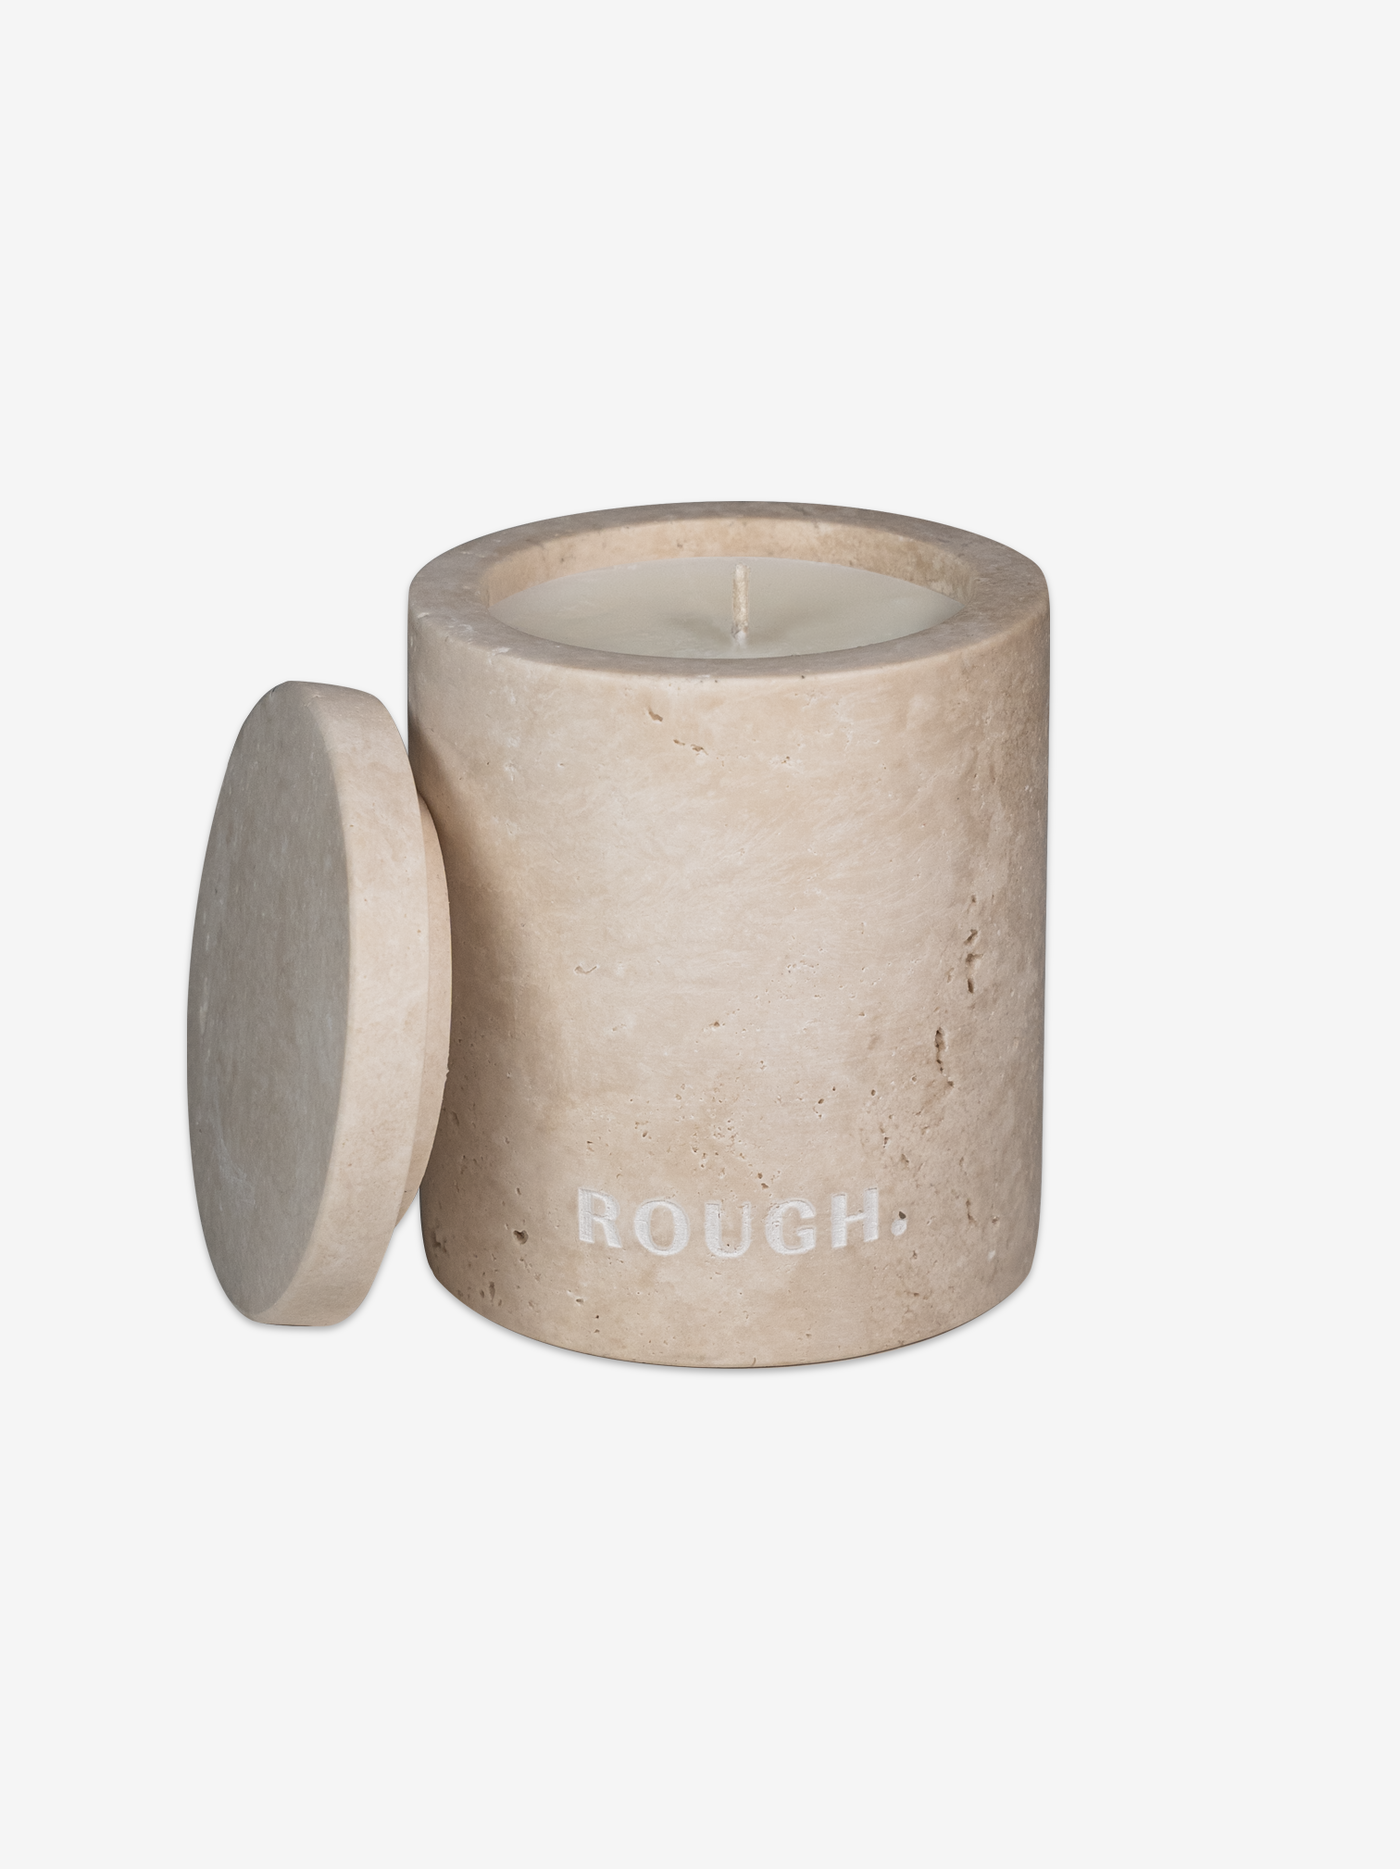 SCENTED TRAVERTINE CANDLE